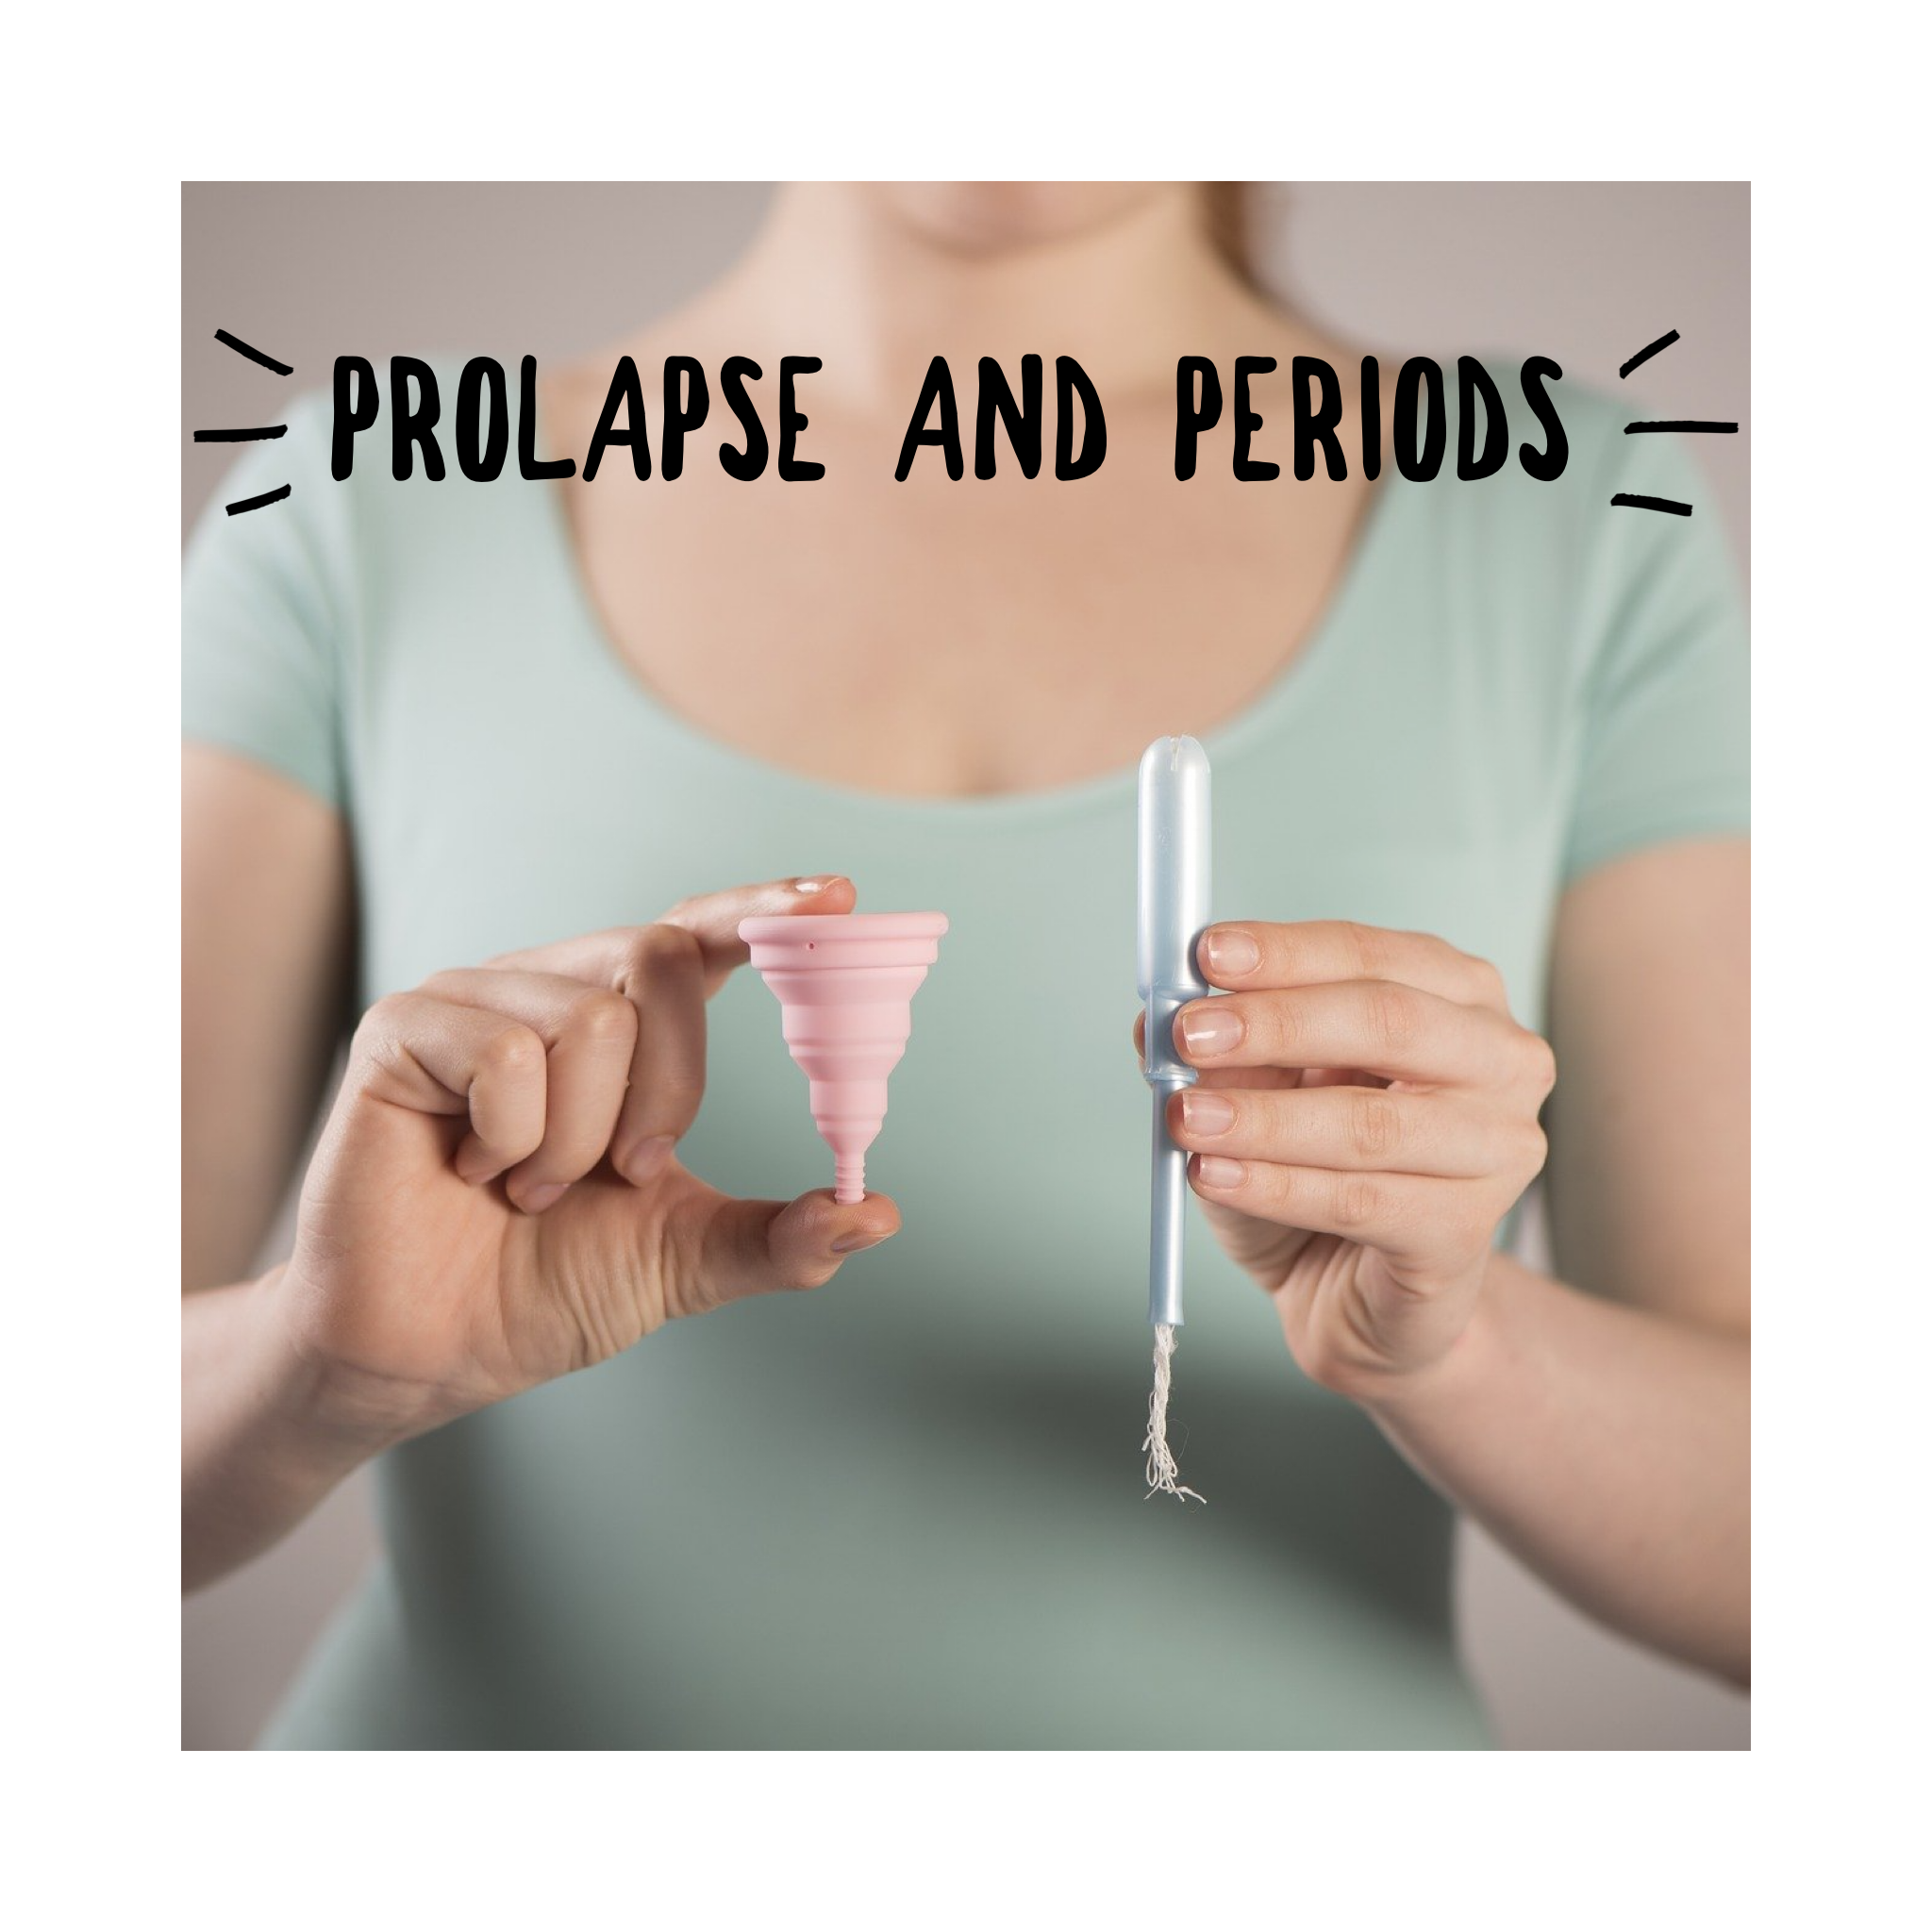 Prolapse and Periods, lets talk about it...